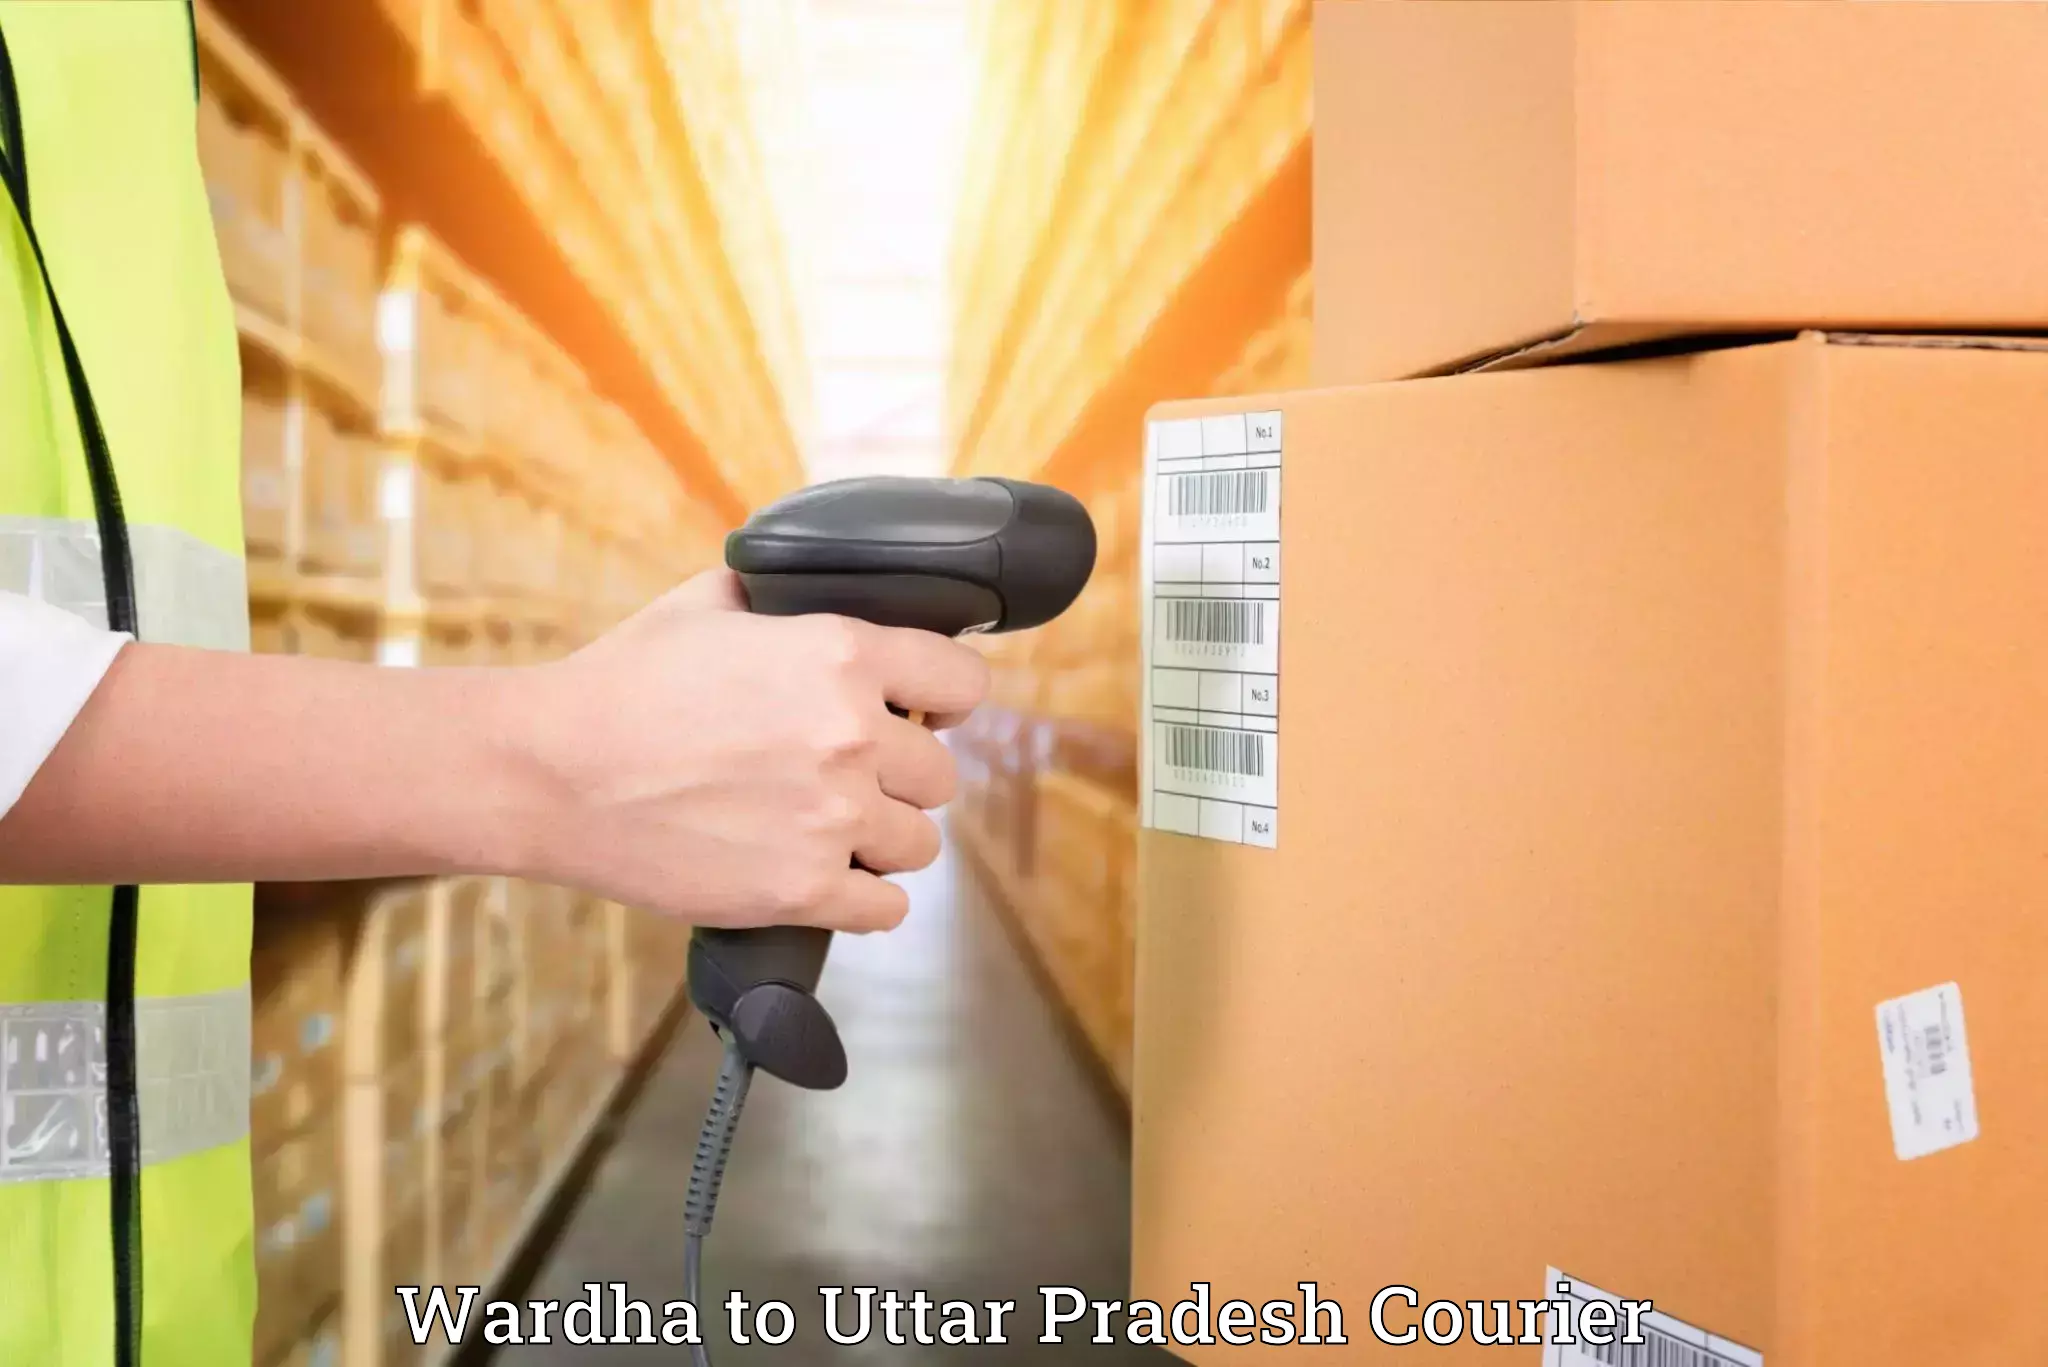 Trusted relocation experts Wardha to Jalesar